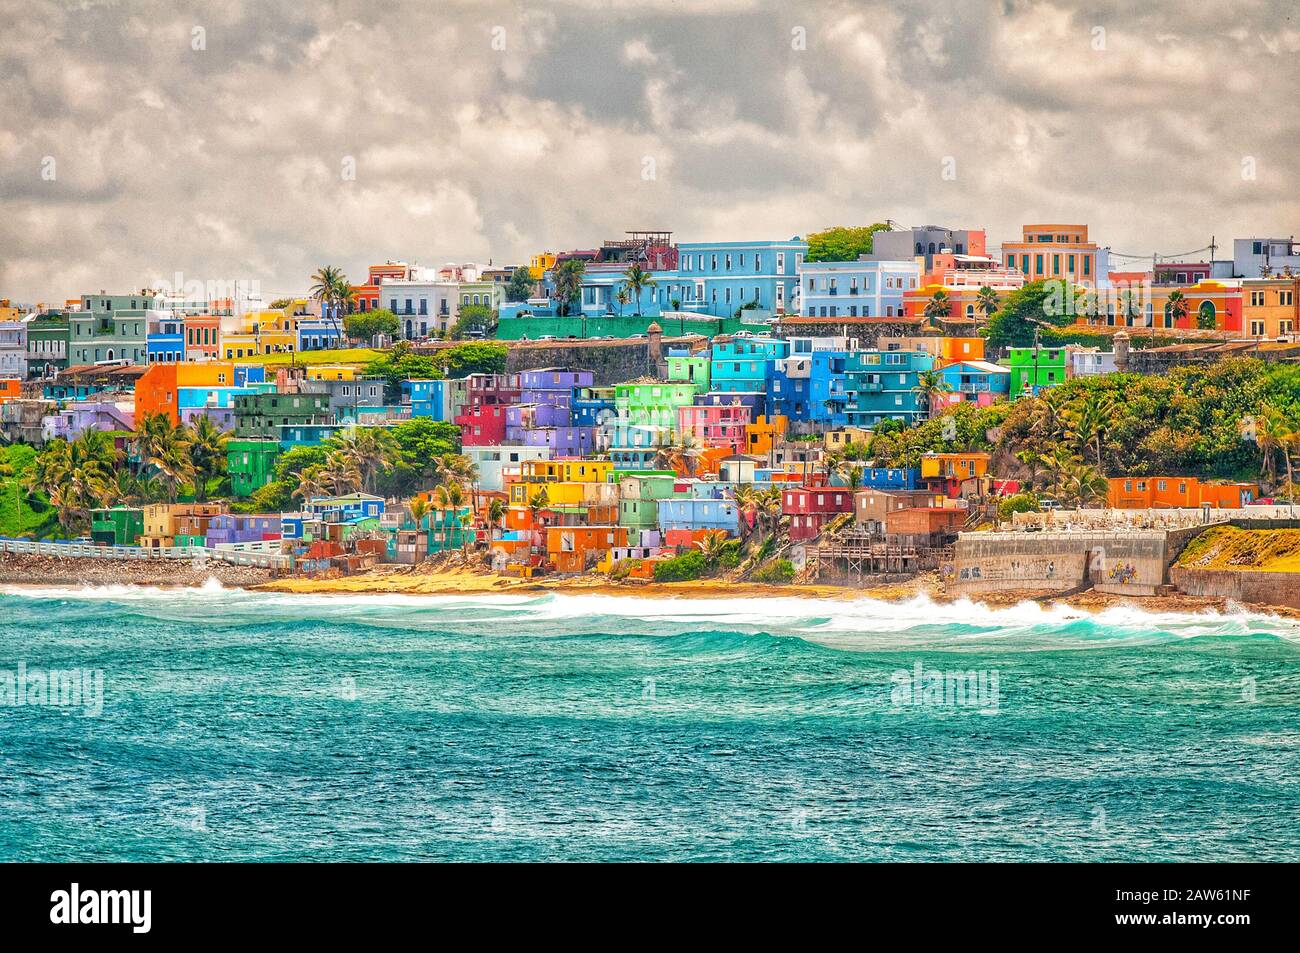 Colorful houses line the hillside over looking the beach in San Juan, Puerto Rico. Stock Photo